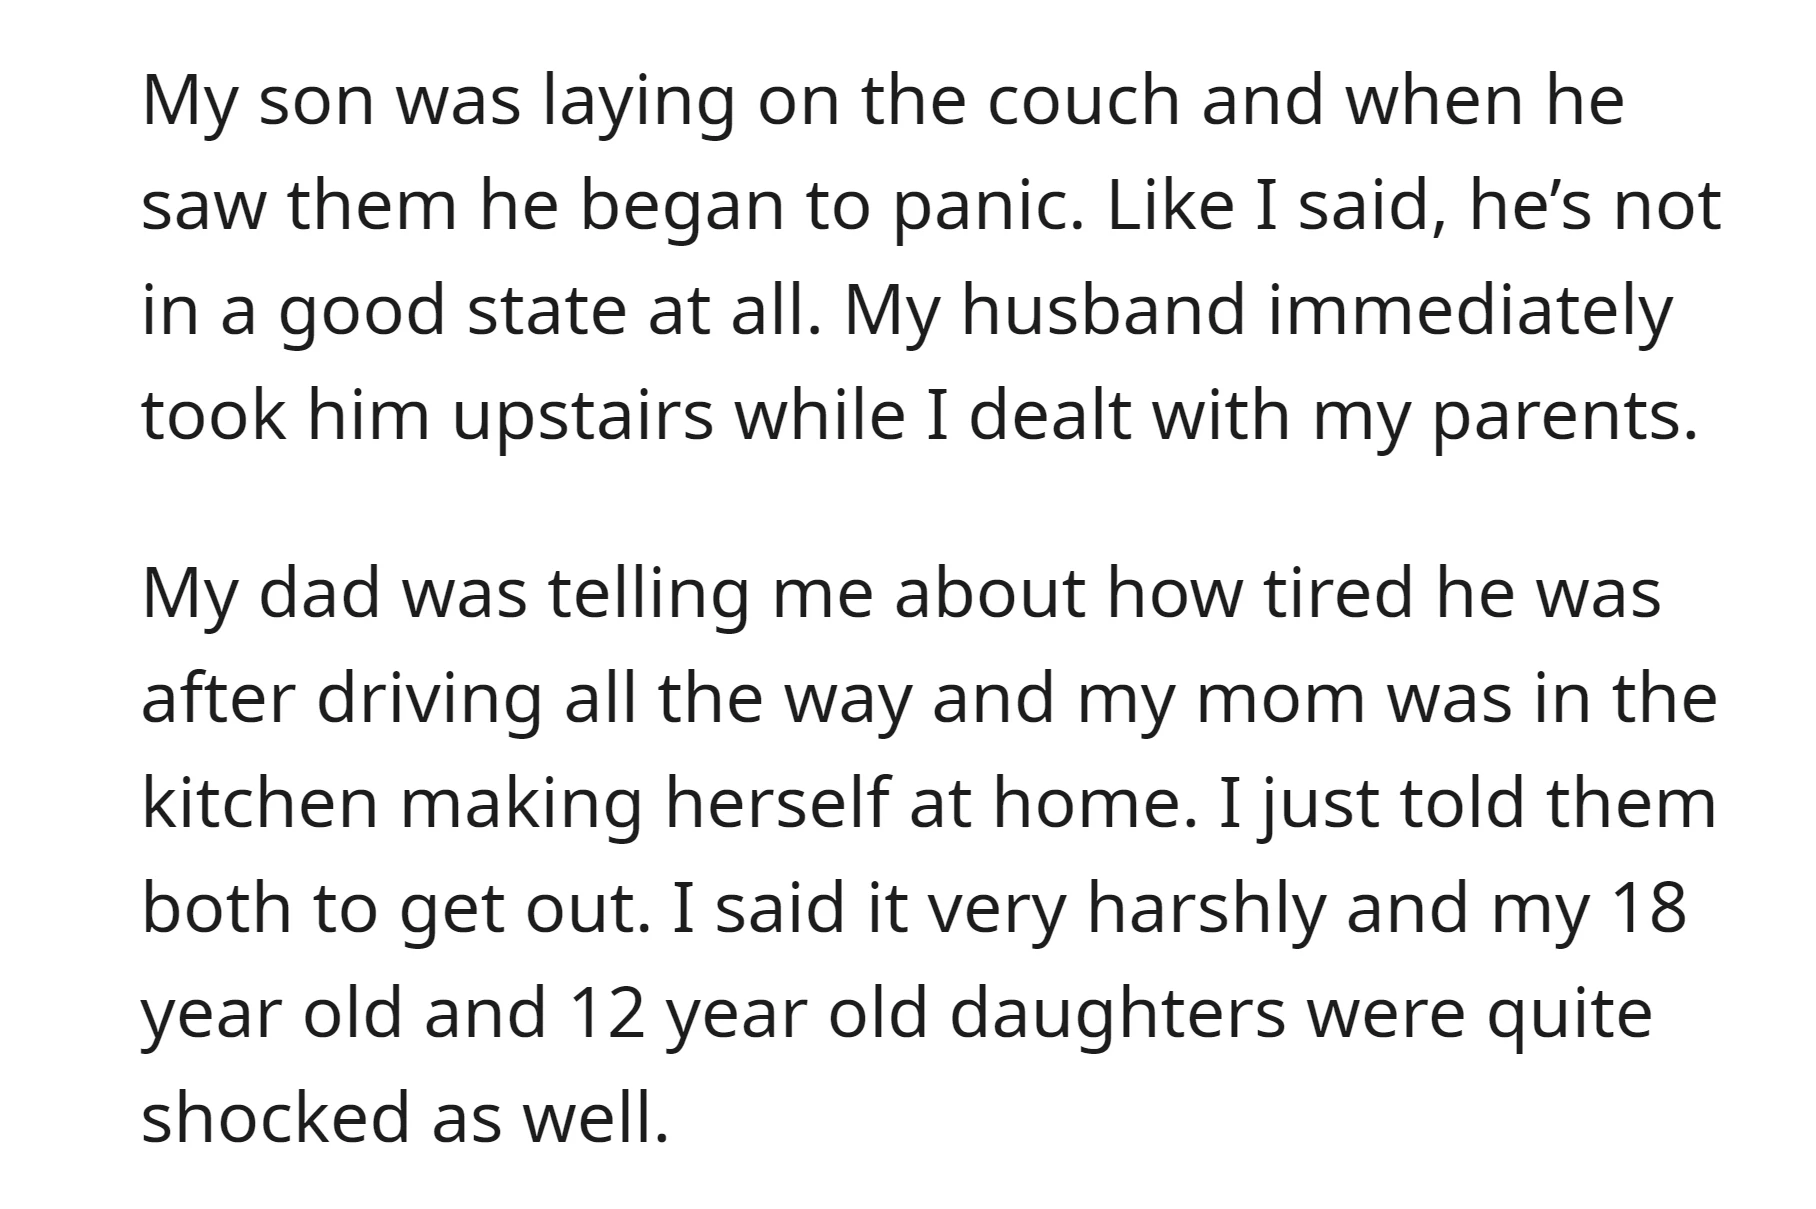 As OP's son felt uncomfortable so she bluntly told her parents to leave